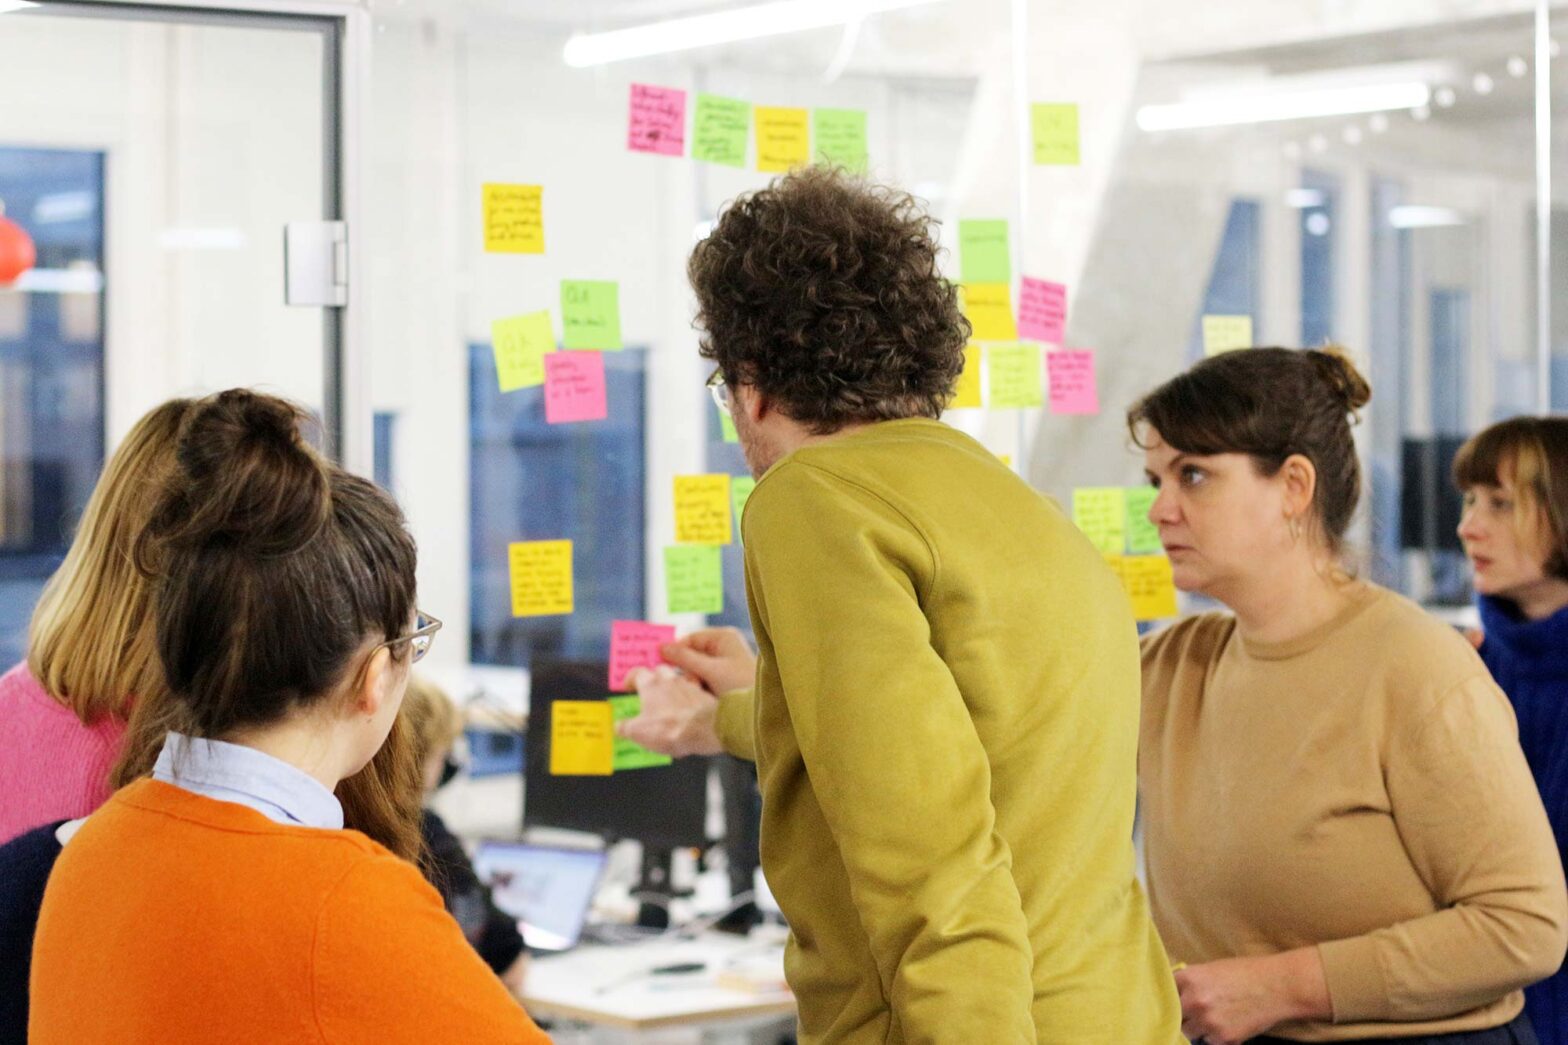 6 members of the DigitalService design team collecting colourful sticky notes on a glass wall in a modern office space